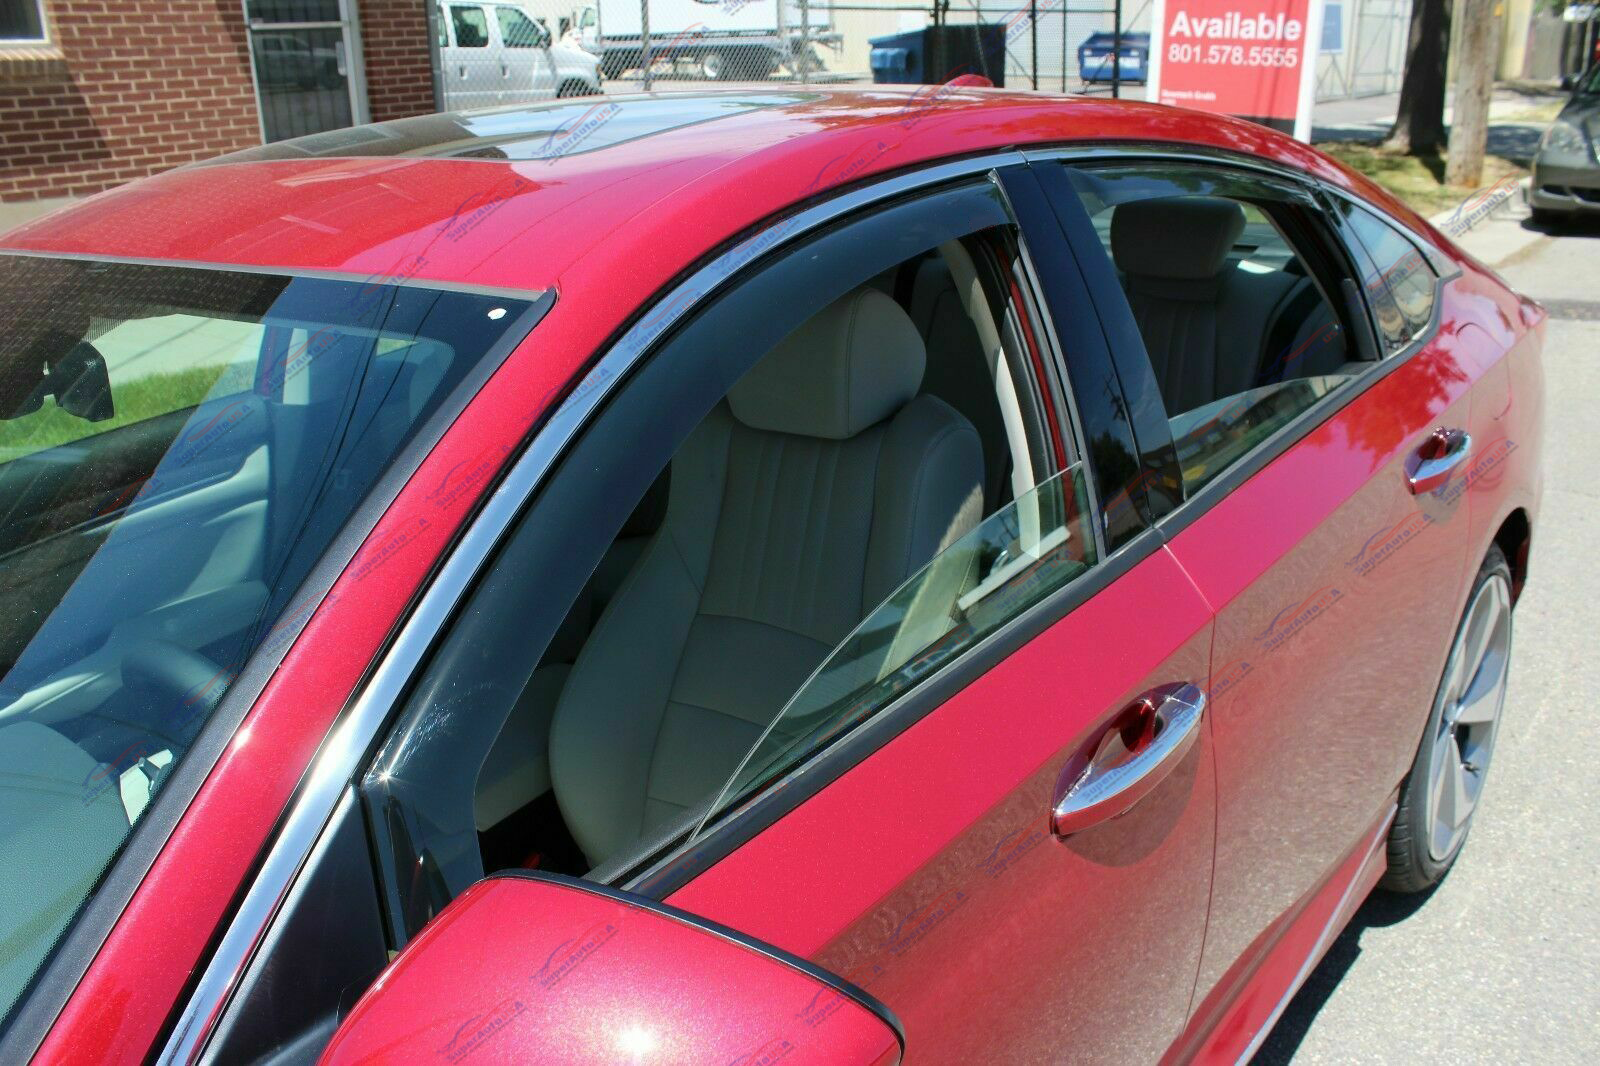 Dynamic angle of the Kia Forte with In-Channel Vent Window Visors Rain Guards, illustrating their role in deflecting rain and minimizing wind noise